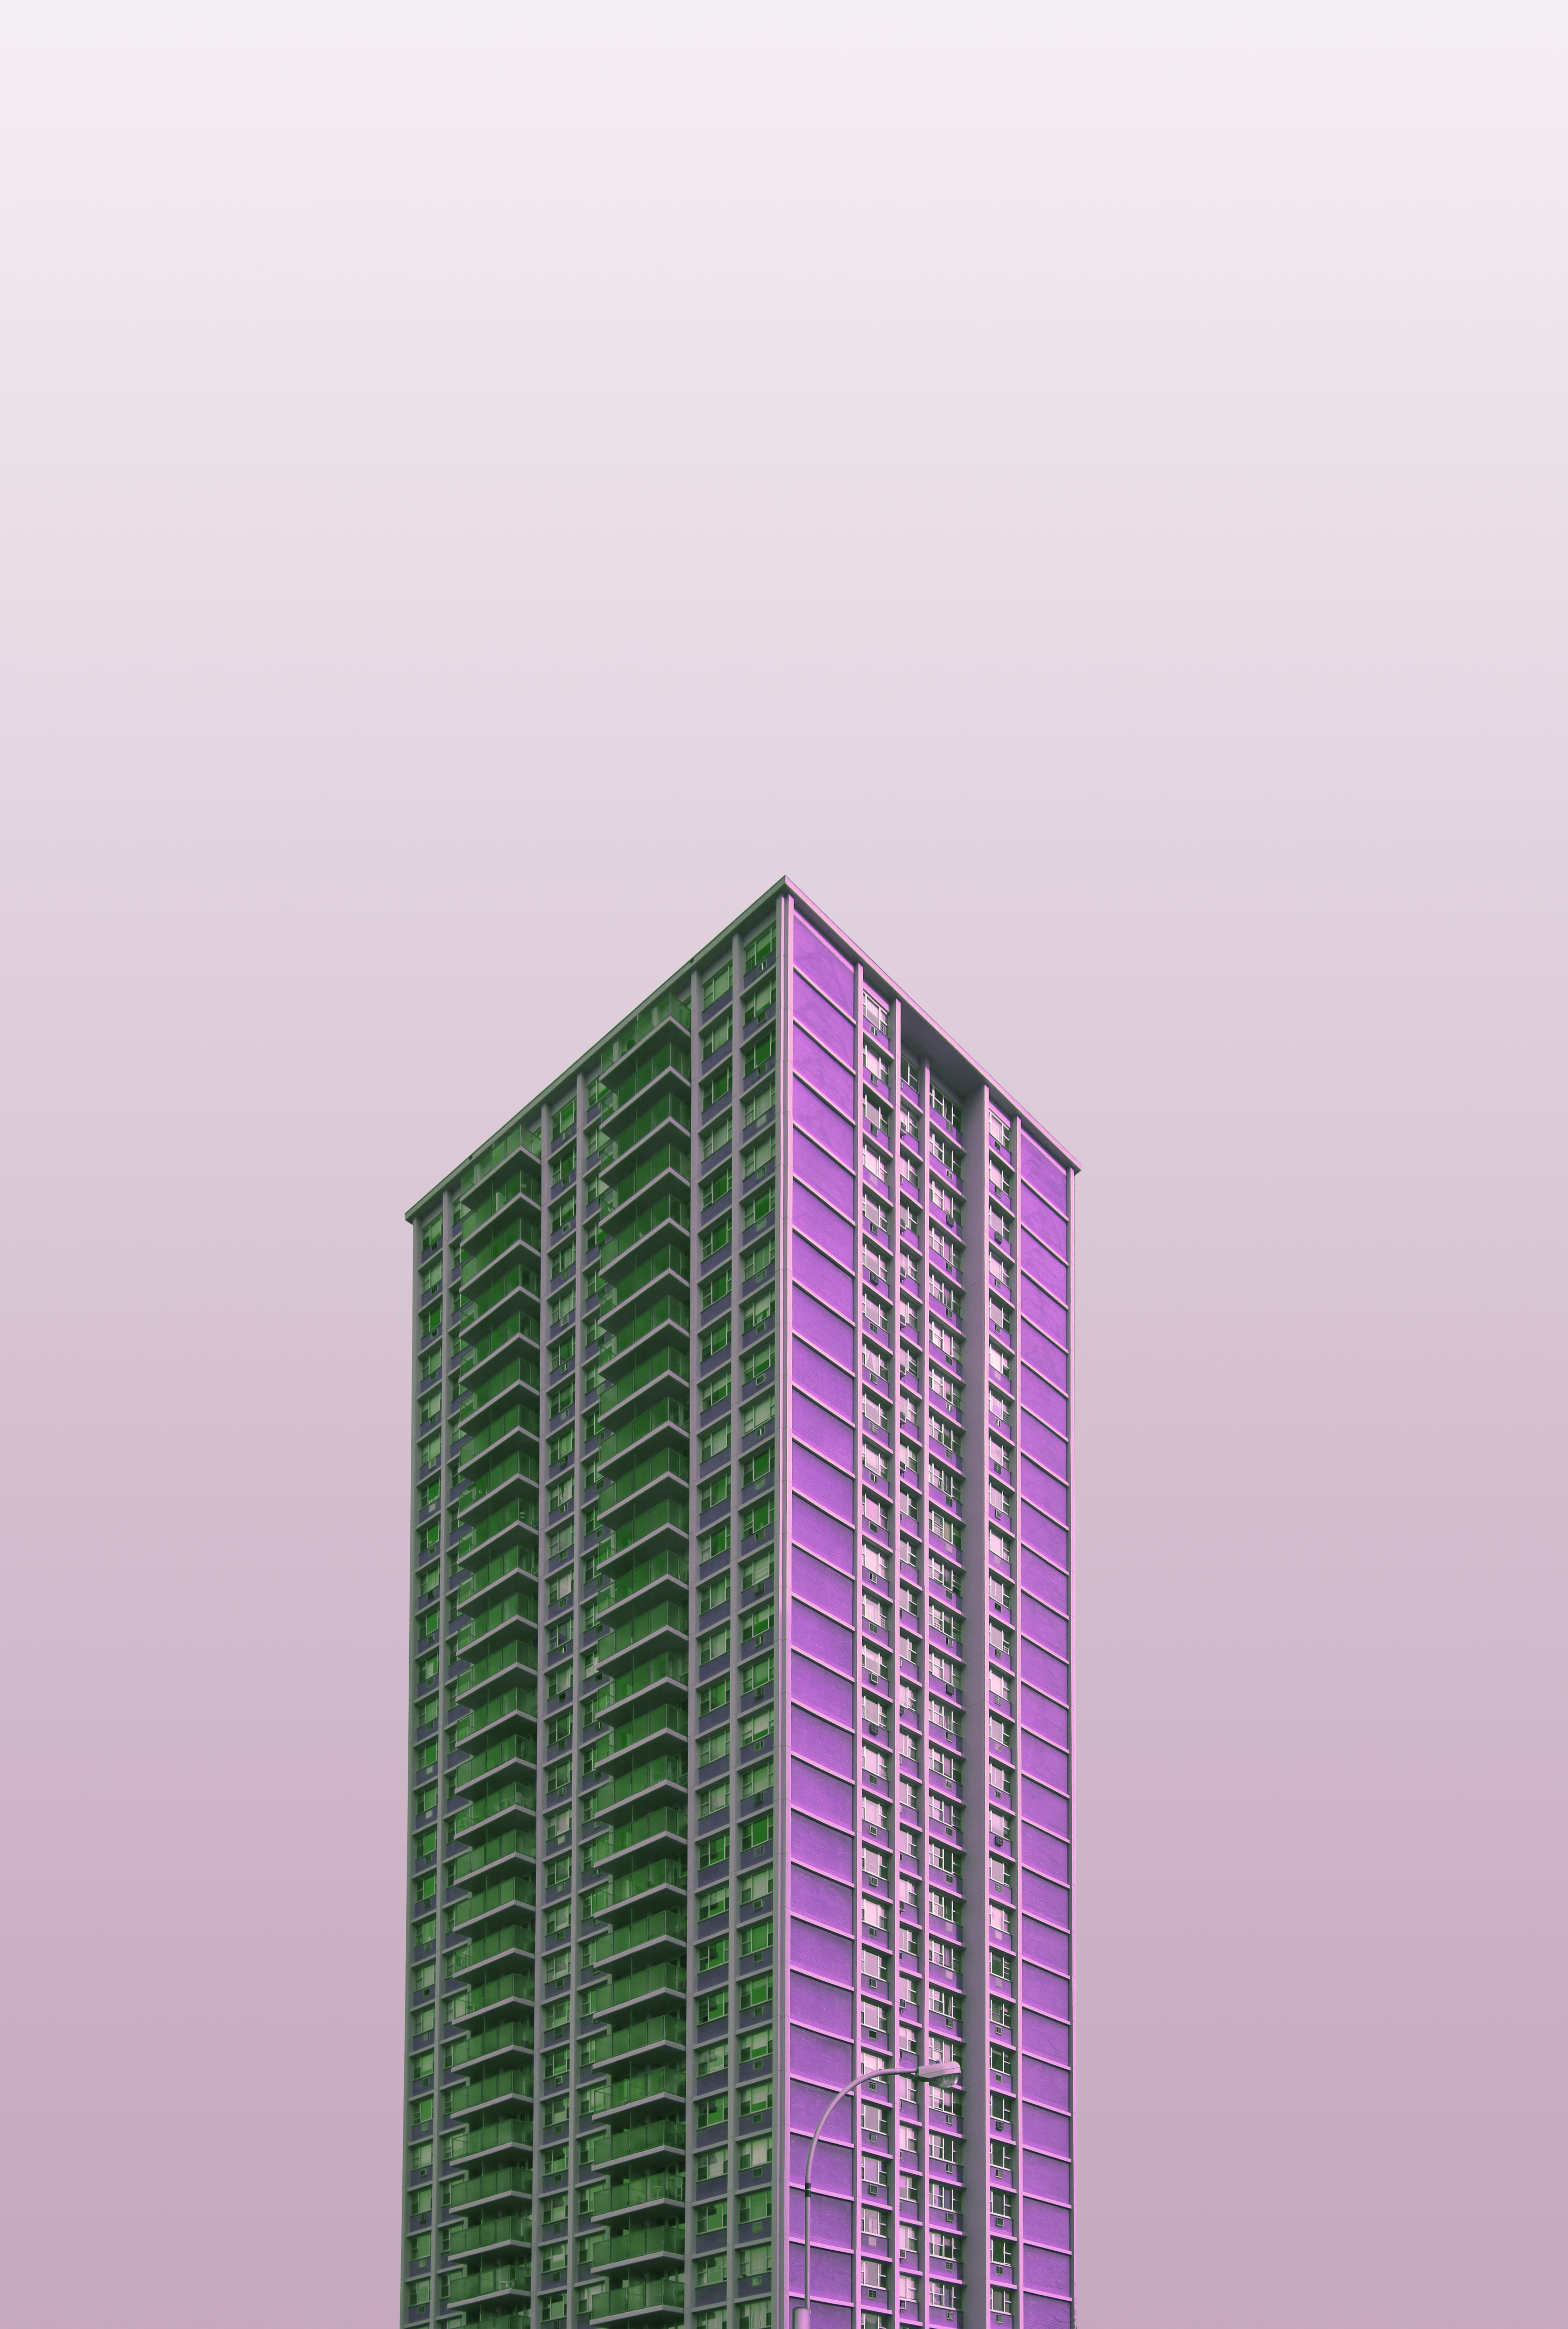 minimalism, purple, architecture, building home screen for smartphone